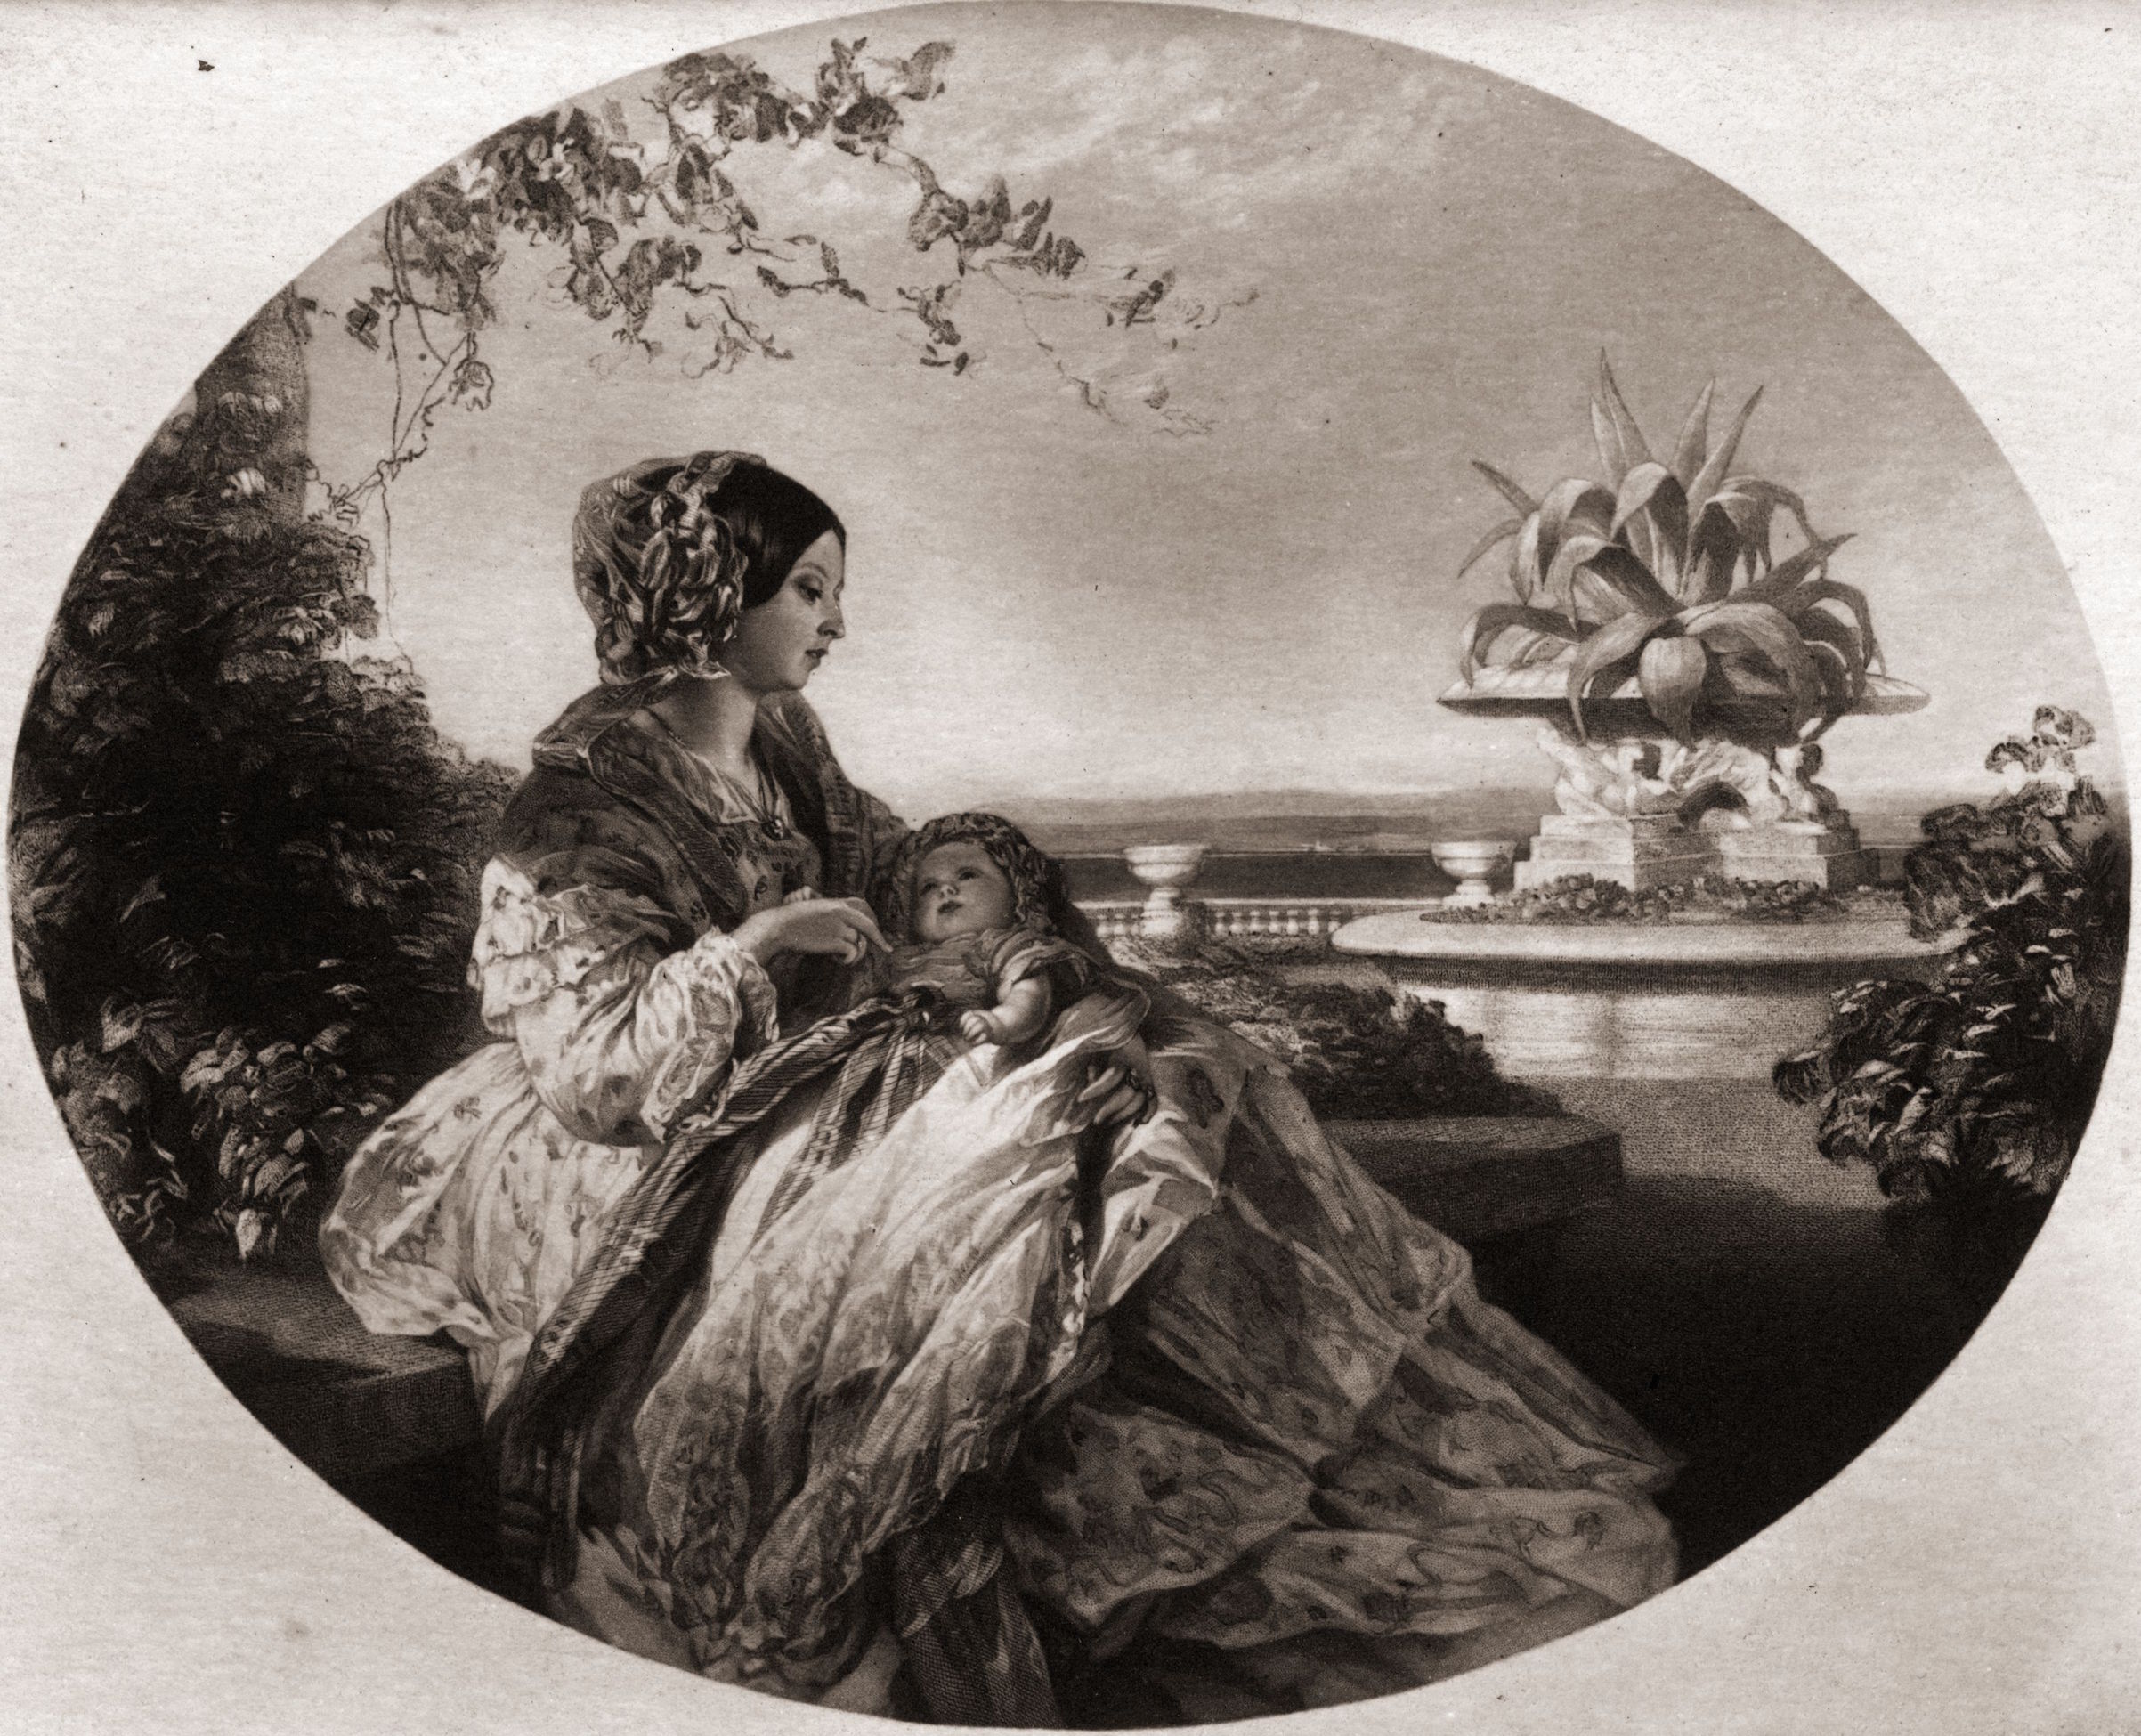 1852: Queen Victoria (1819 - 1901) with her third son Arthur William, Duke of Connaught (1850 - 1942), later Field Marshal Connaught. An engraving after Winterhalter. (Rischgitz/Getty Images)